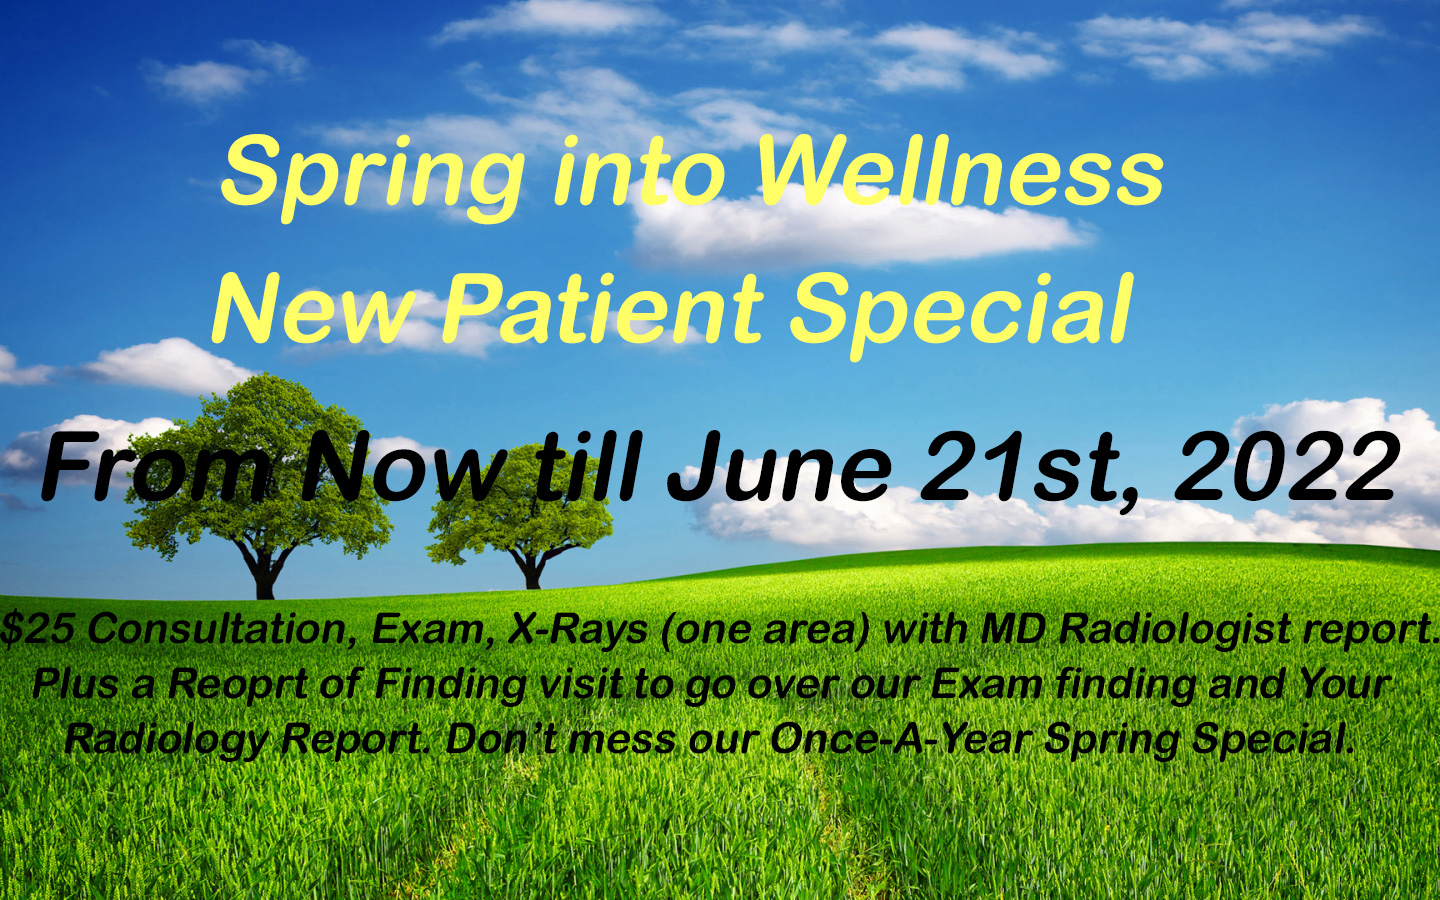 Spring into Wellness - New Patient Special